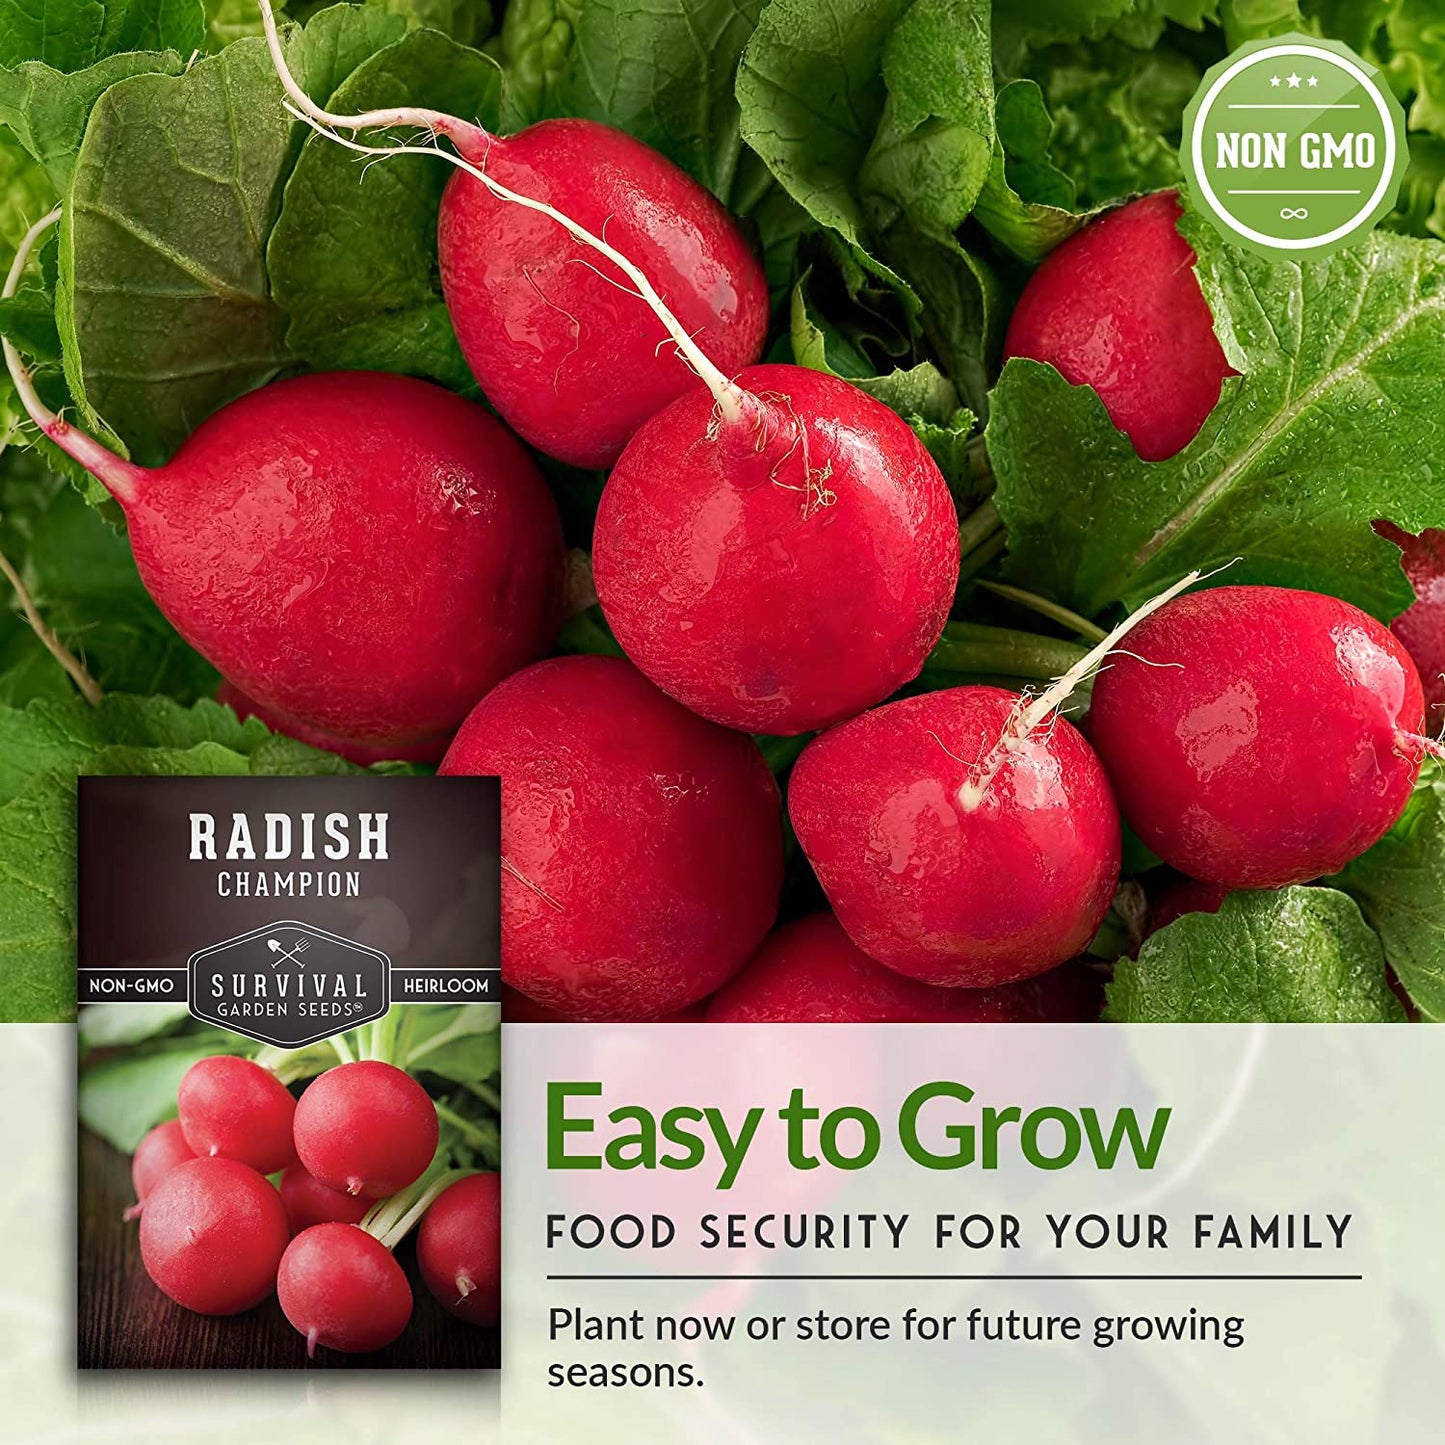 - Champion Radish Seed for Planting - Packet with Instructions to Plant and Grow Red Radishes in Your Home Vegetable Garden - Non-Gmo Heirloom Variety